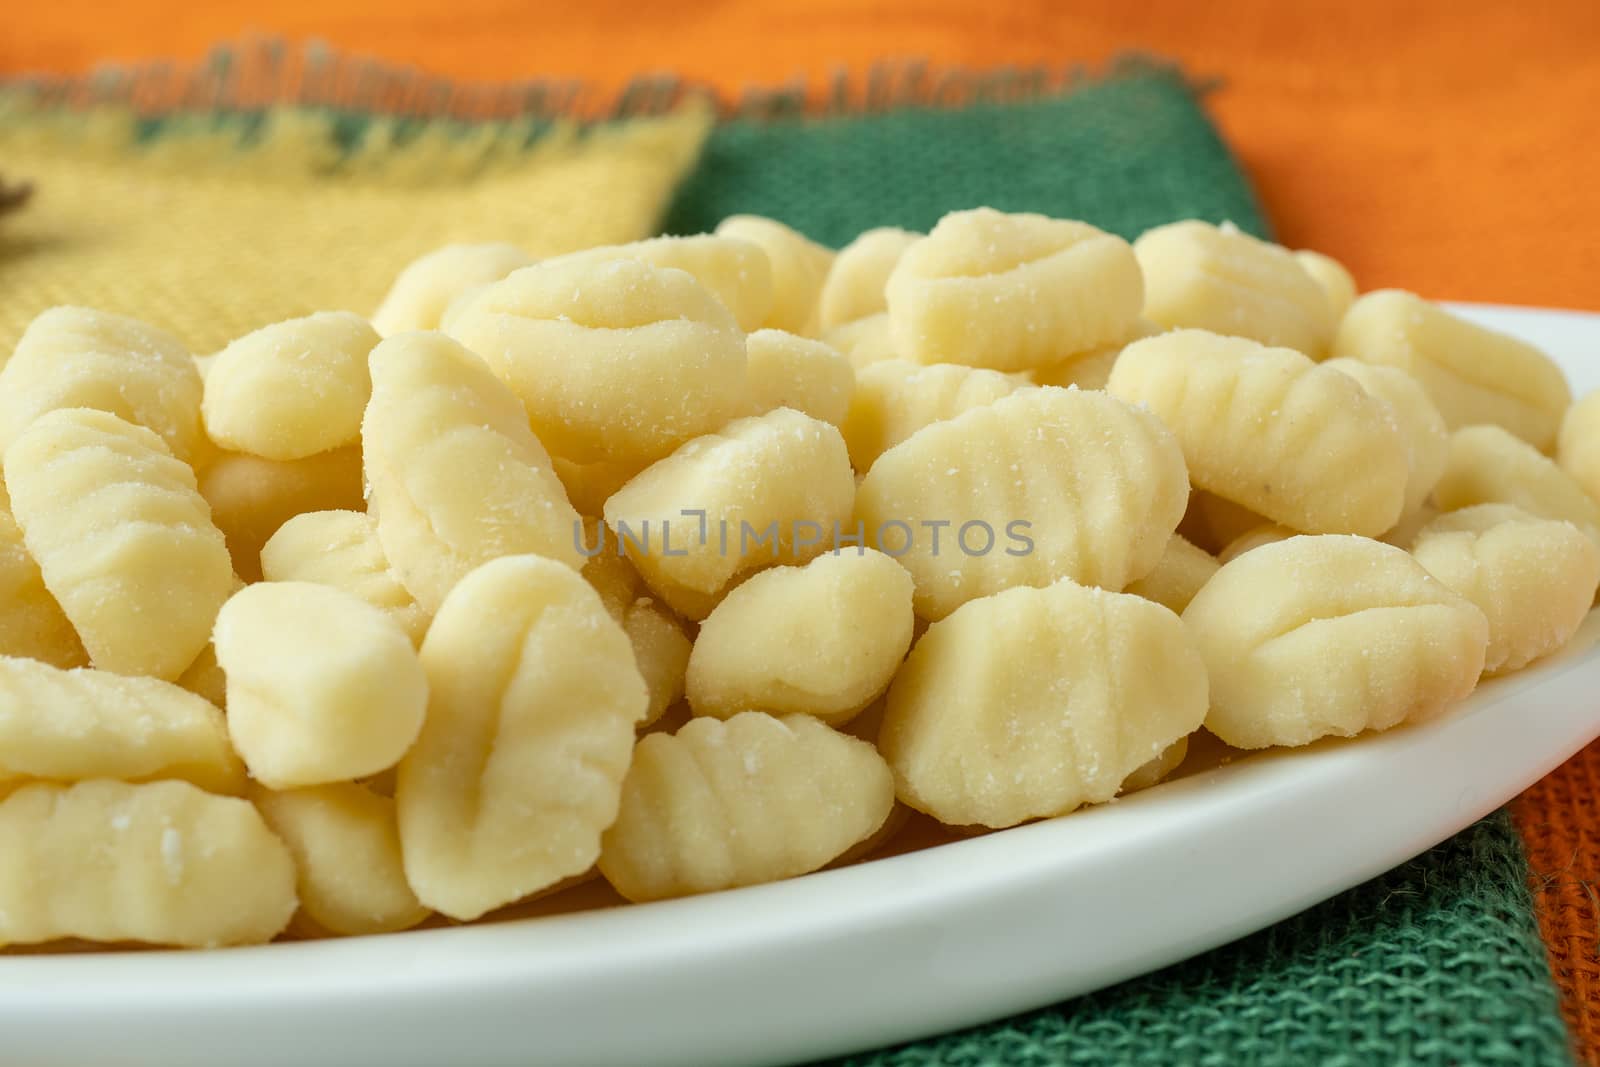 Uncooked homemade potato gnocchi in a white bowl by xtrekx